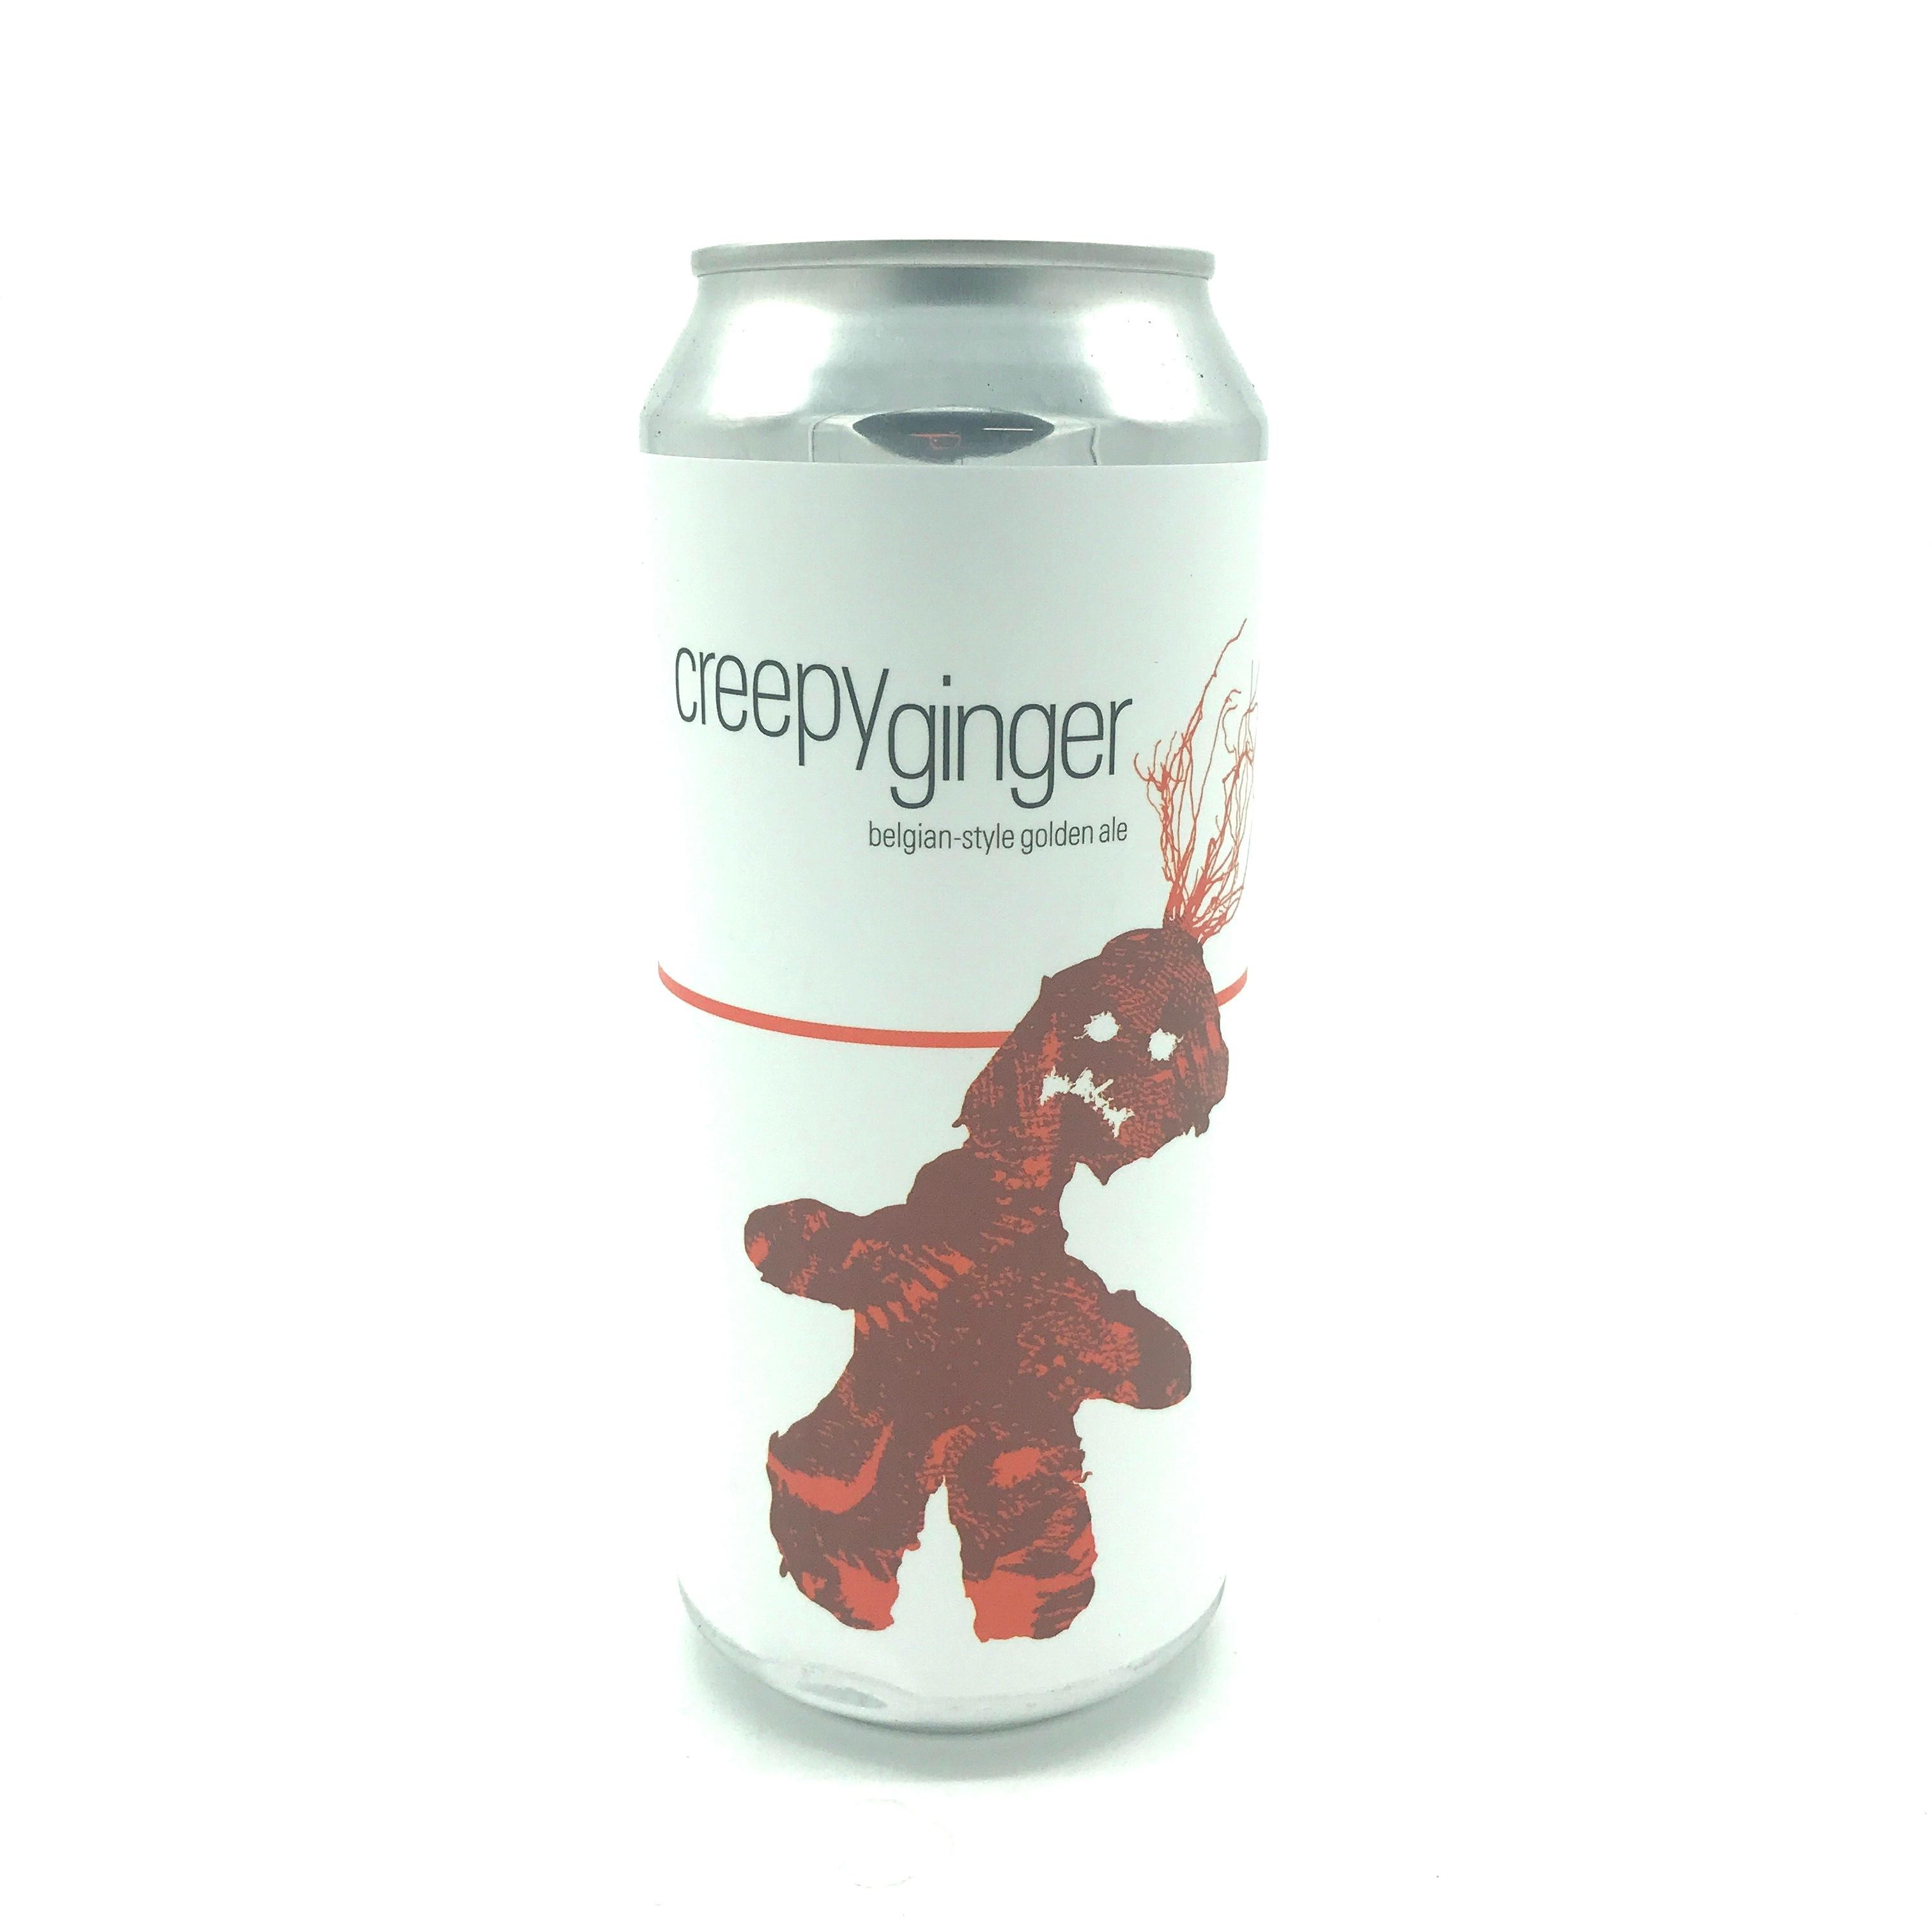 Maplewood - Creepy Ginger: 10yr Anniversary Heritage Release (Limit 2)